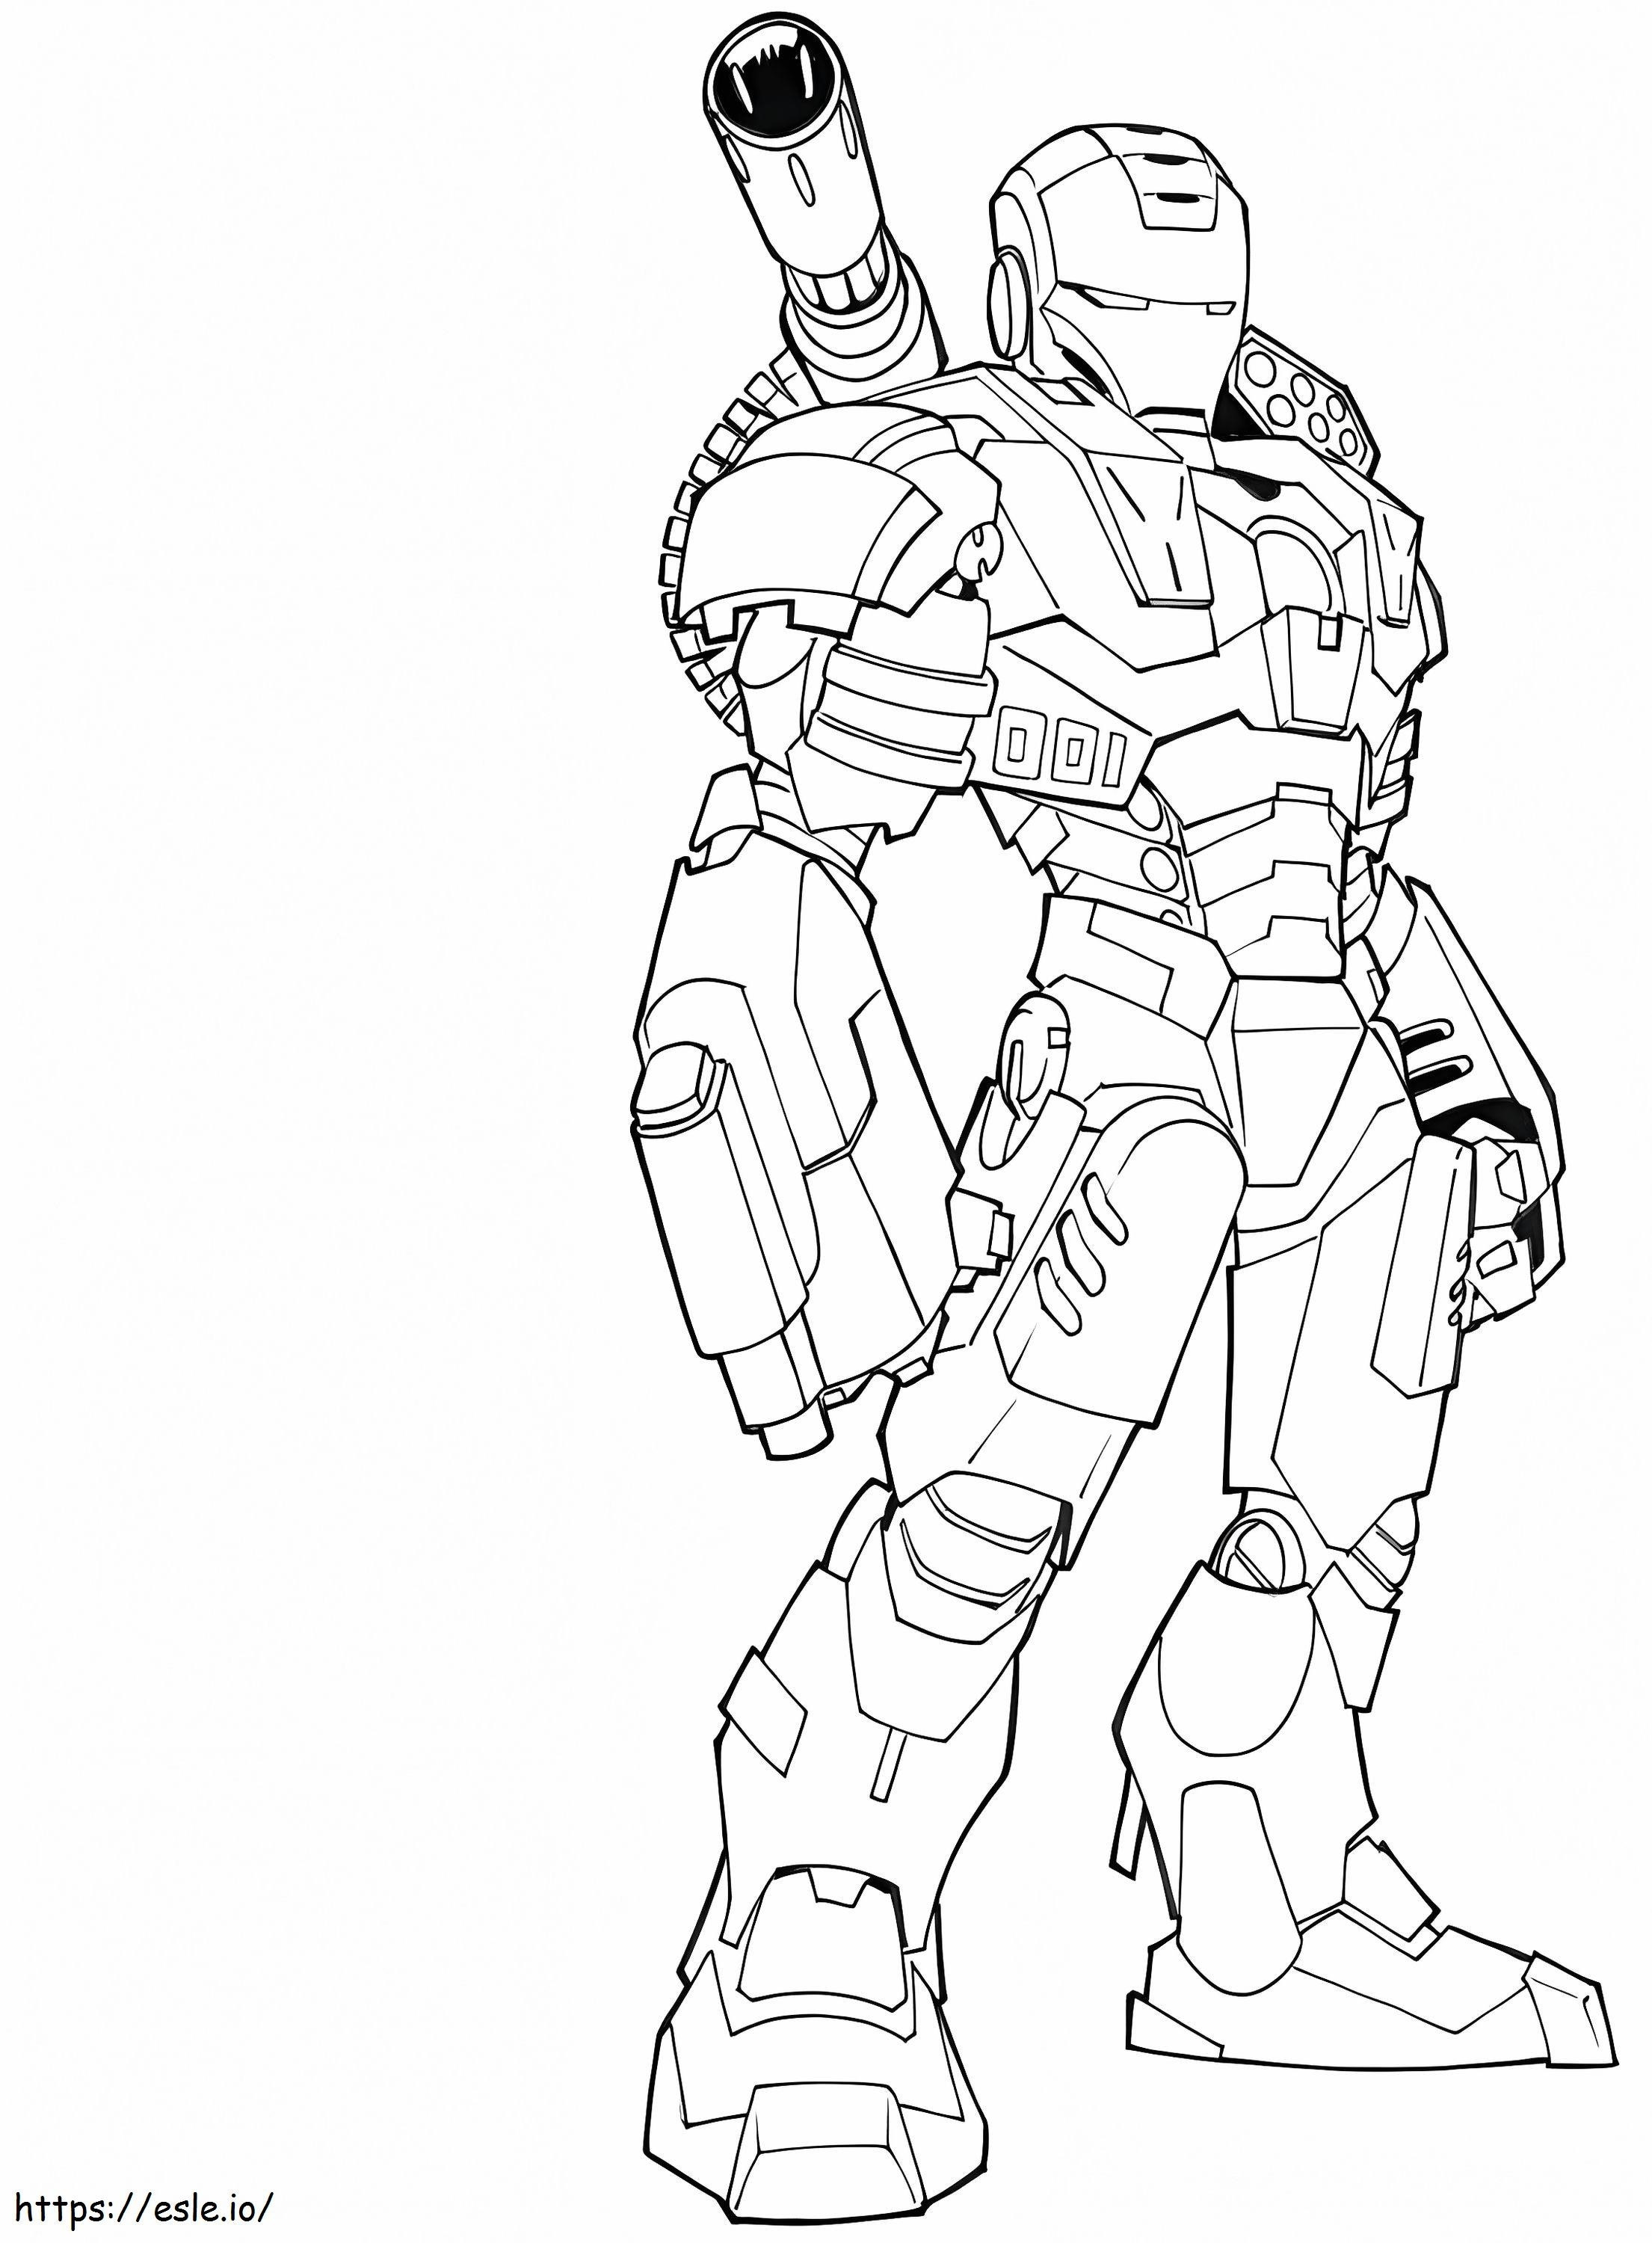 1562377359 Super Hero Iron Man A4 coloring page